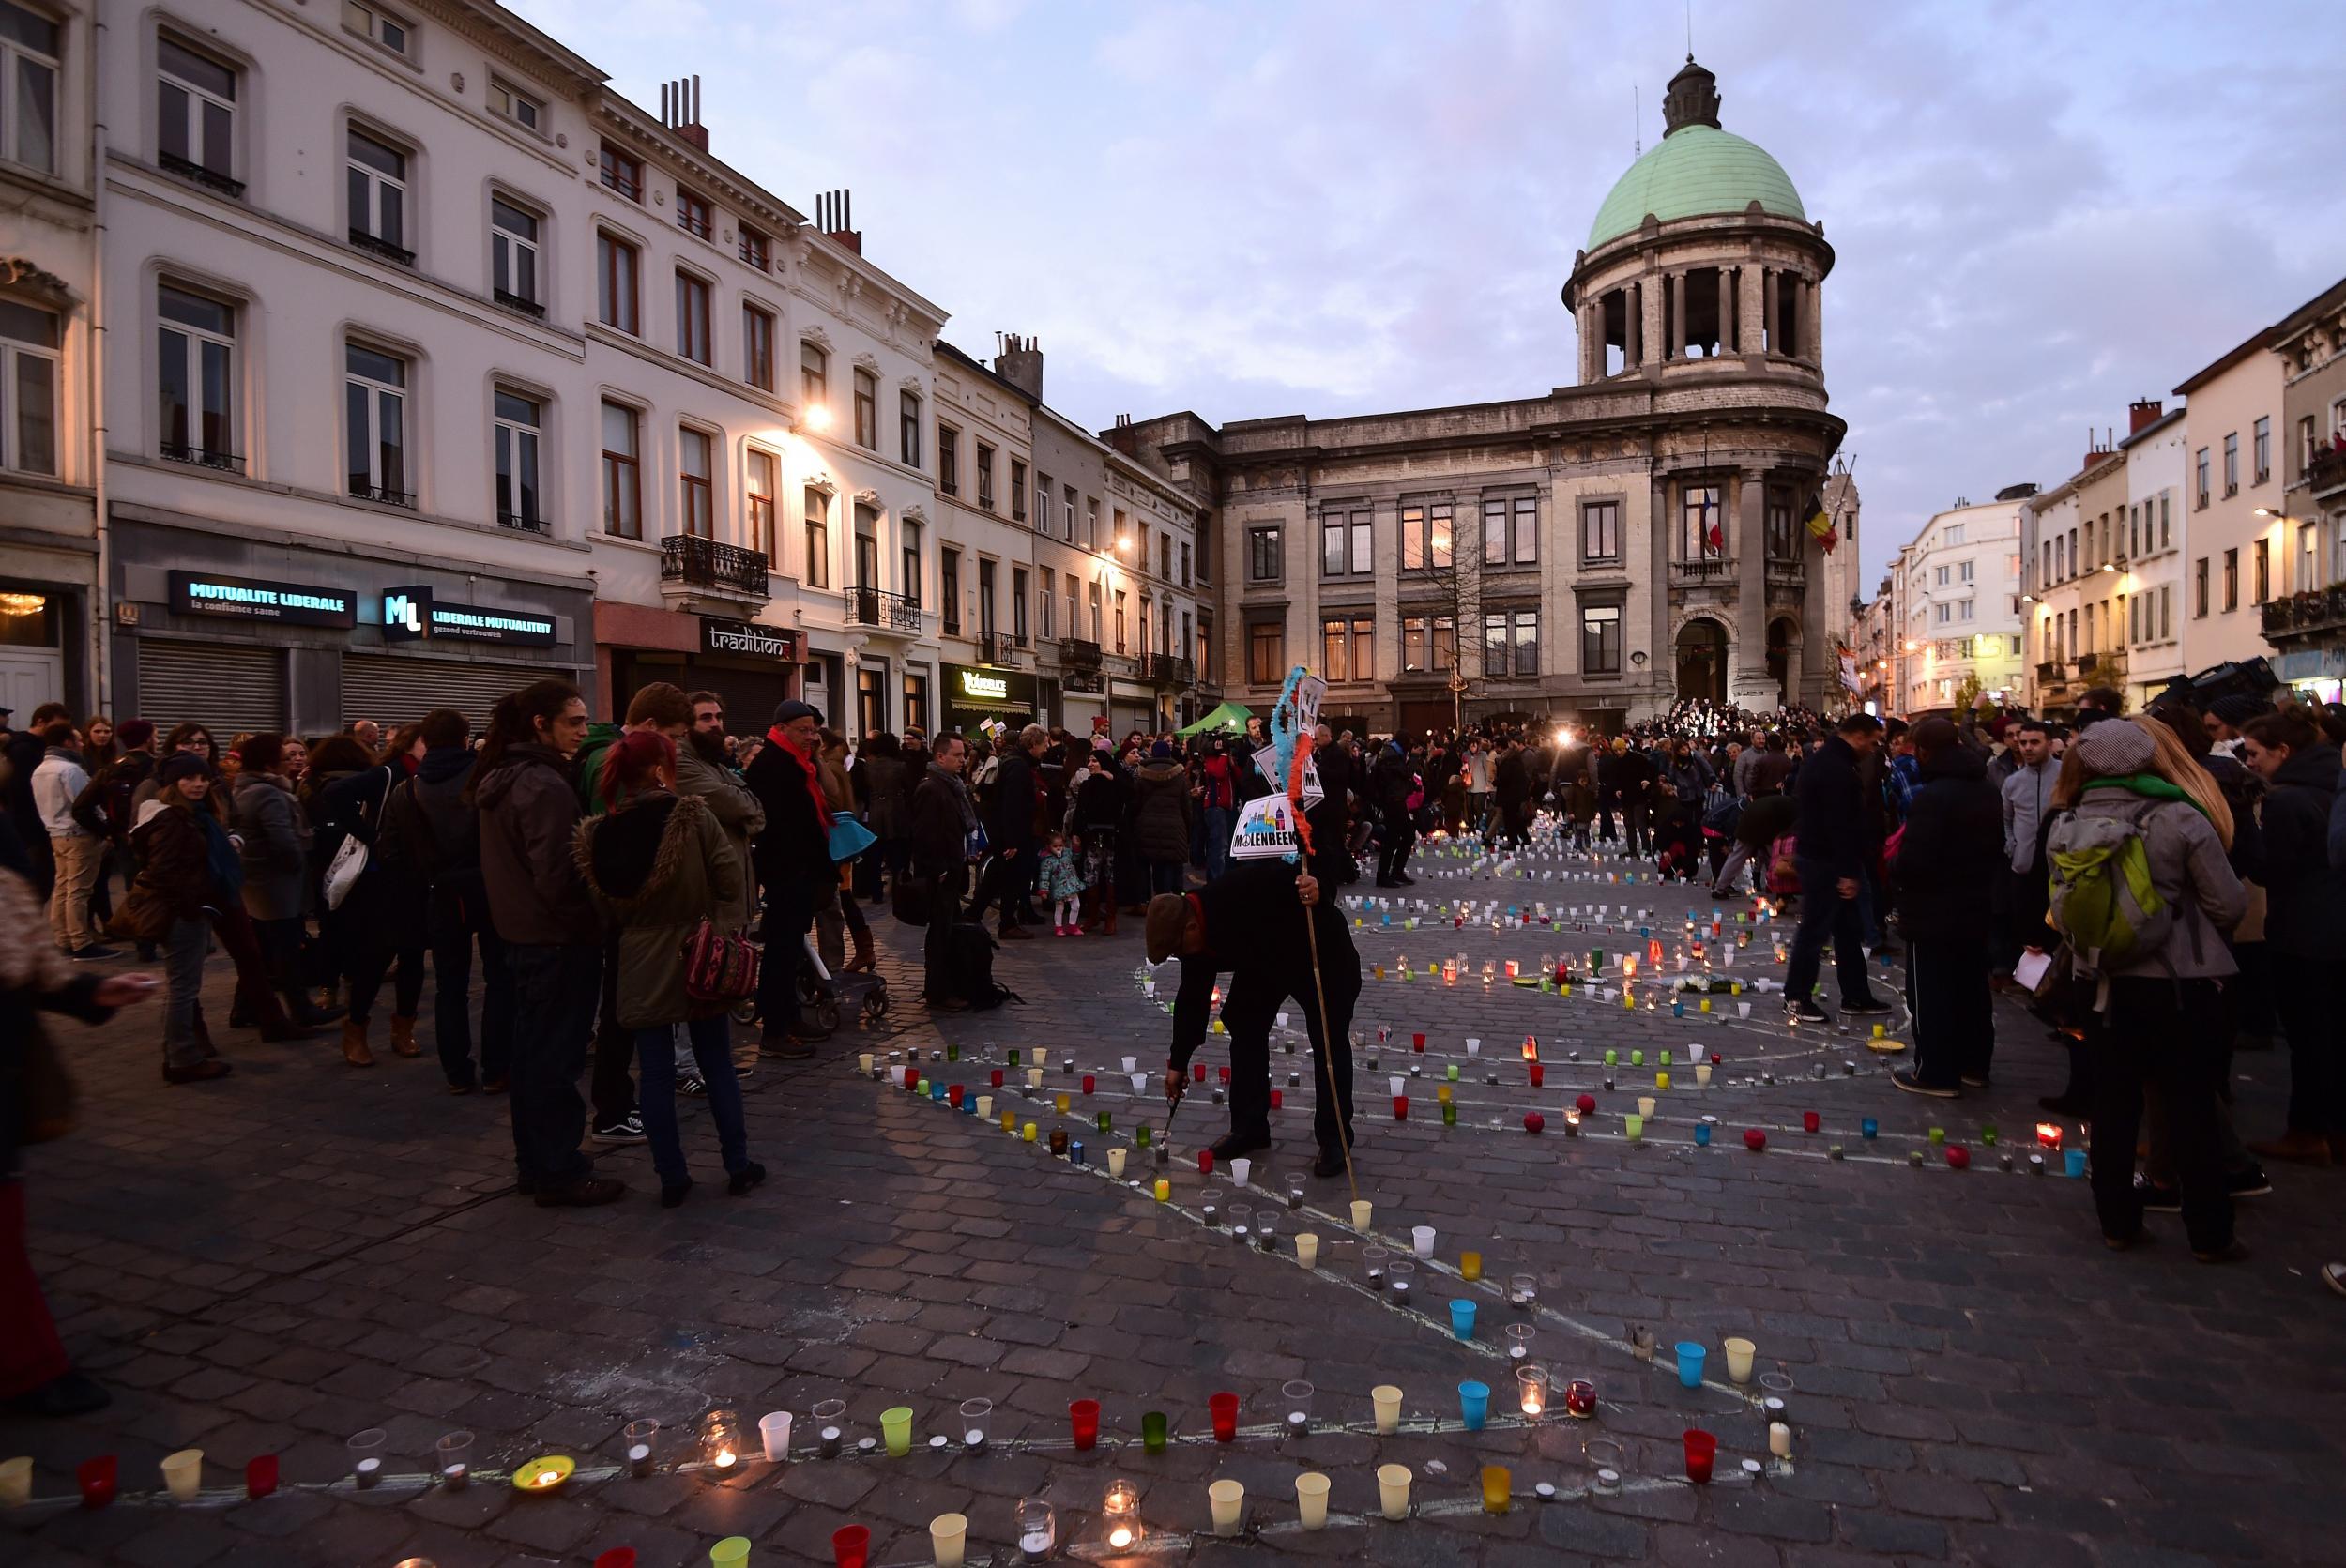 People take part in a candlelight vigil in the main square of Molenbeek, Brussels